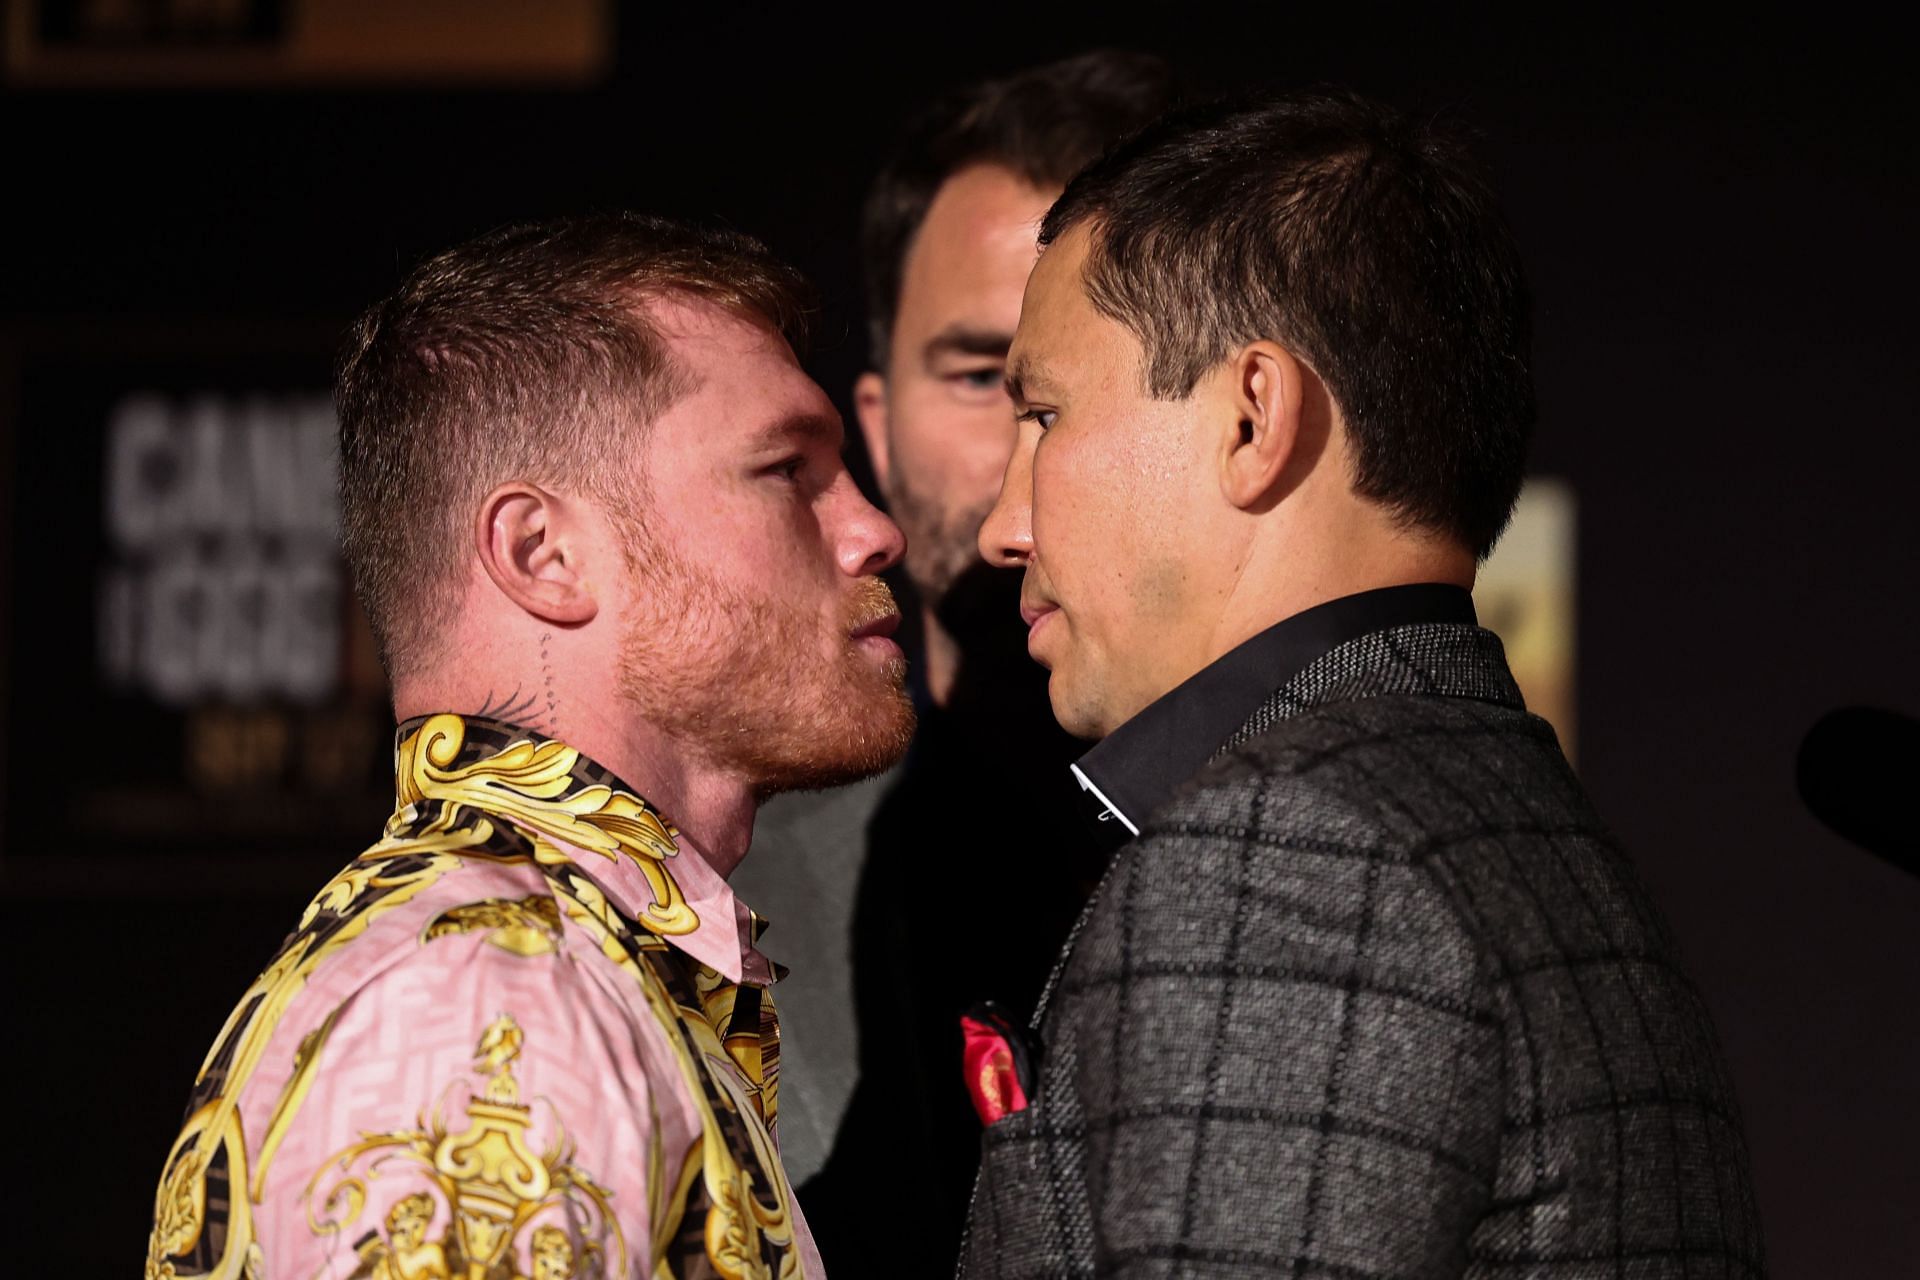 Canelo Alvarez (L) is confident ahead of his fight with Gennadiy Golovkin (R).